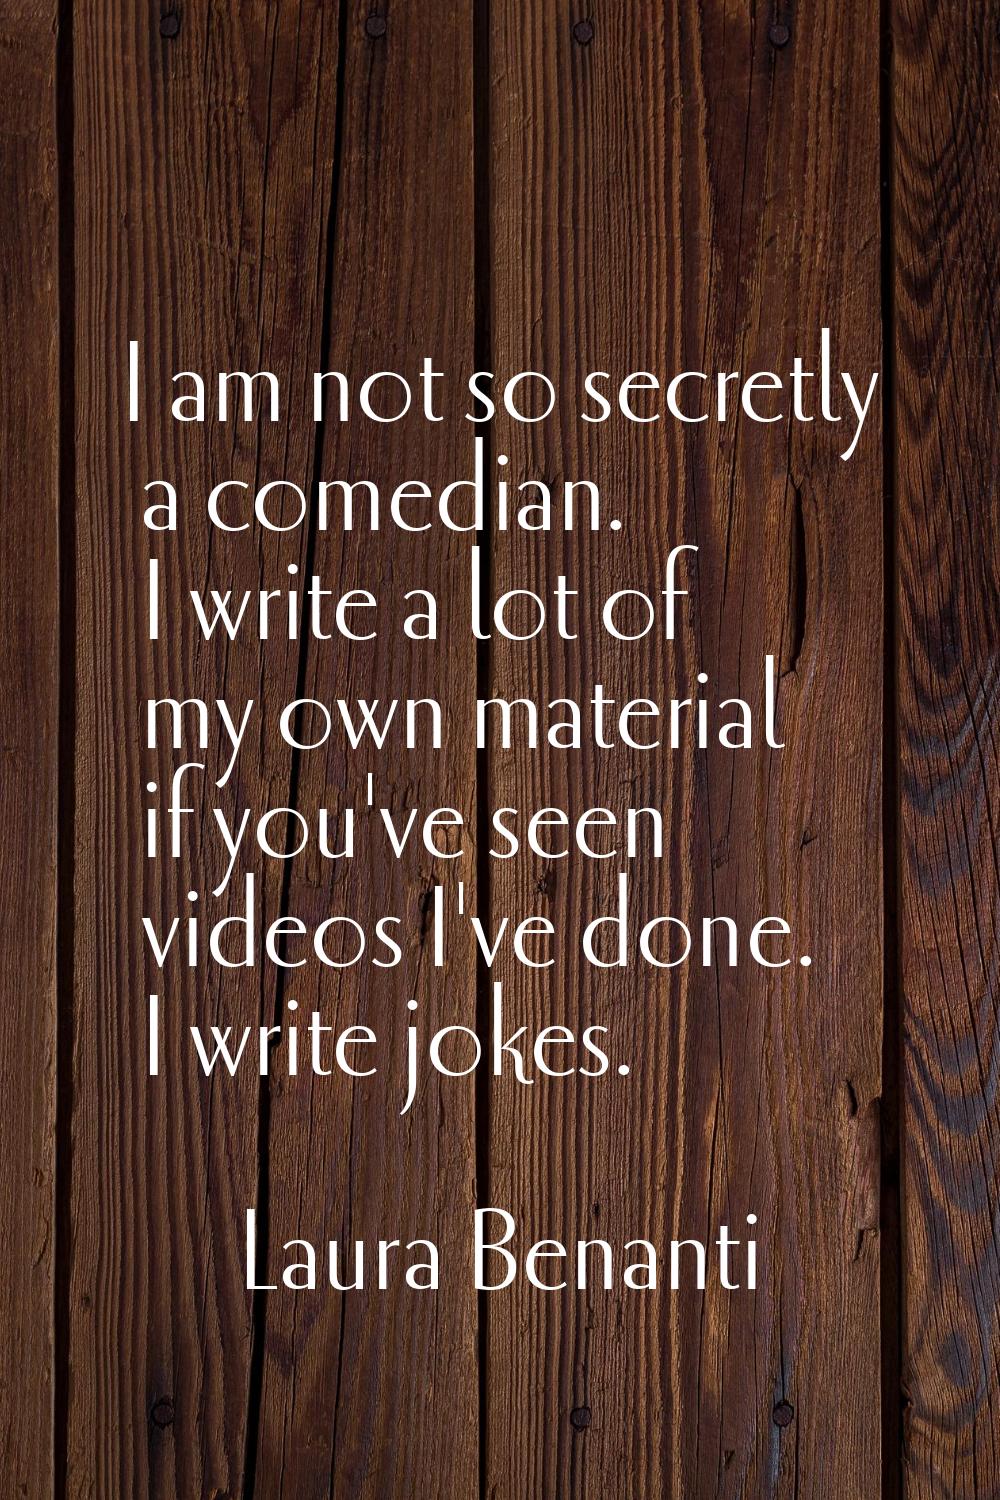 I am not so secretly a comedian. I write a lot of my own material if you've seen videos I've done. 